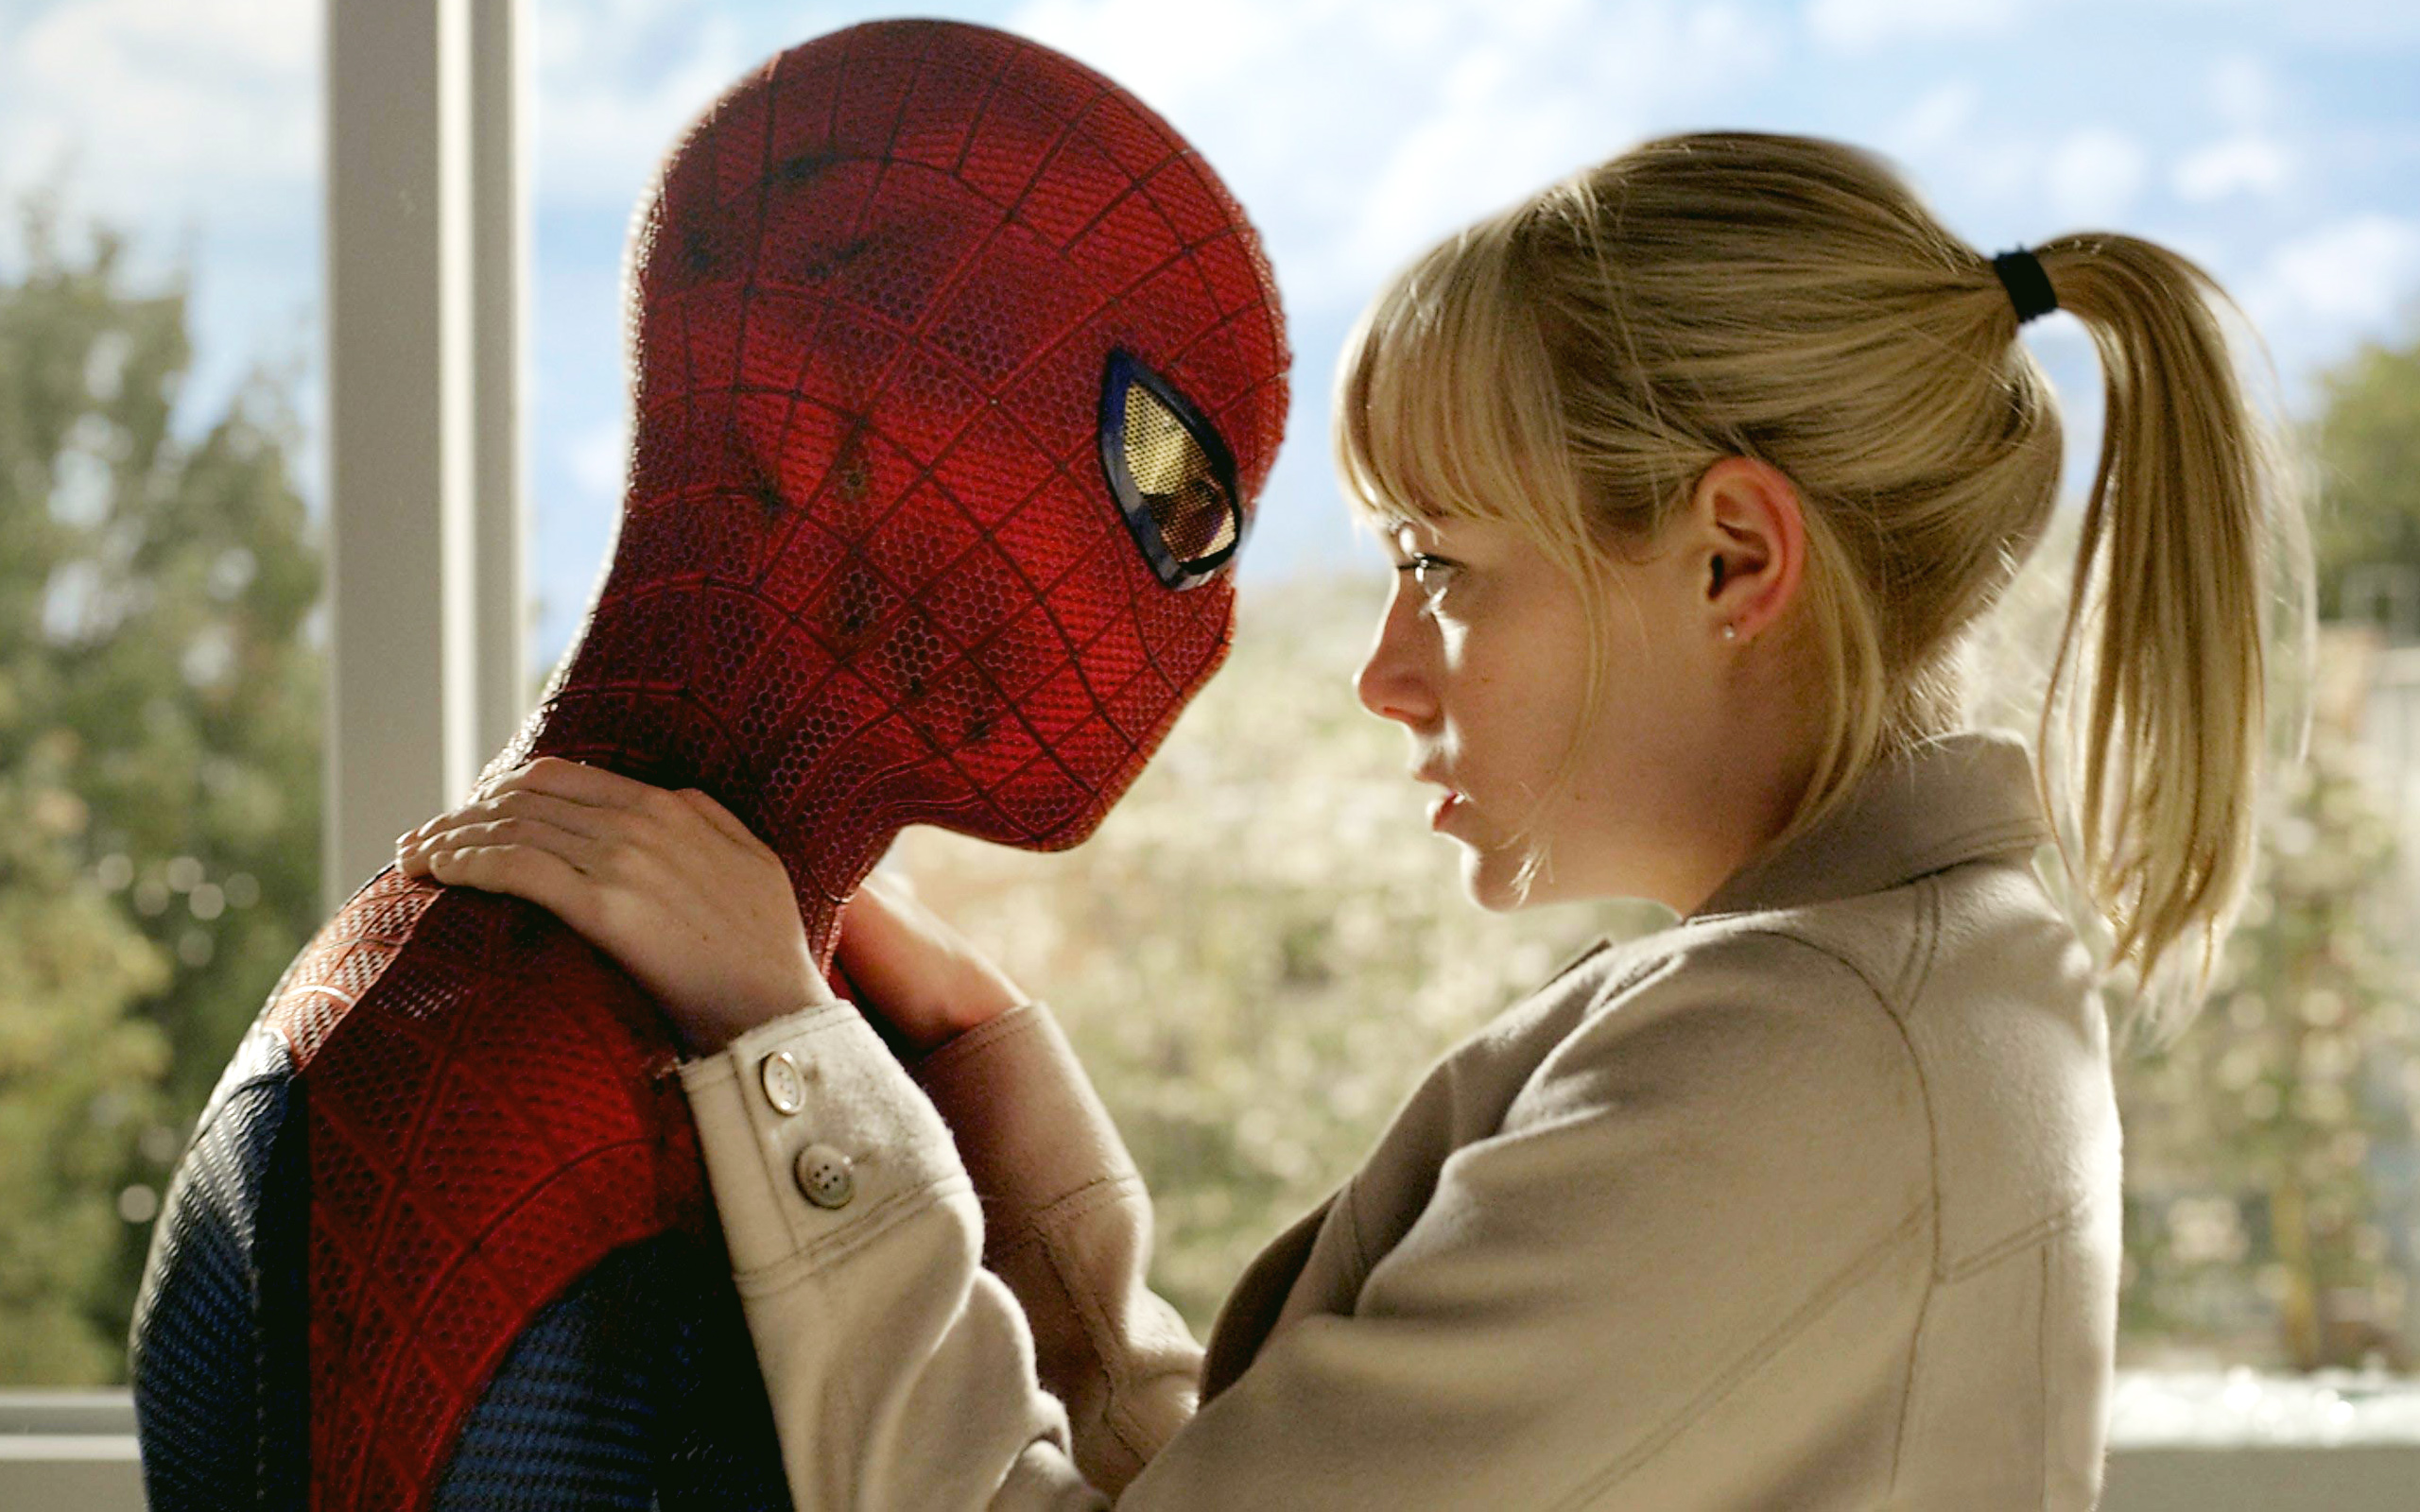 Image result for spiderman and gwen stacy"